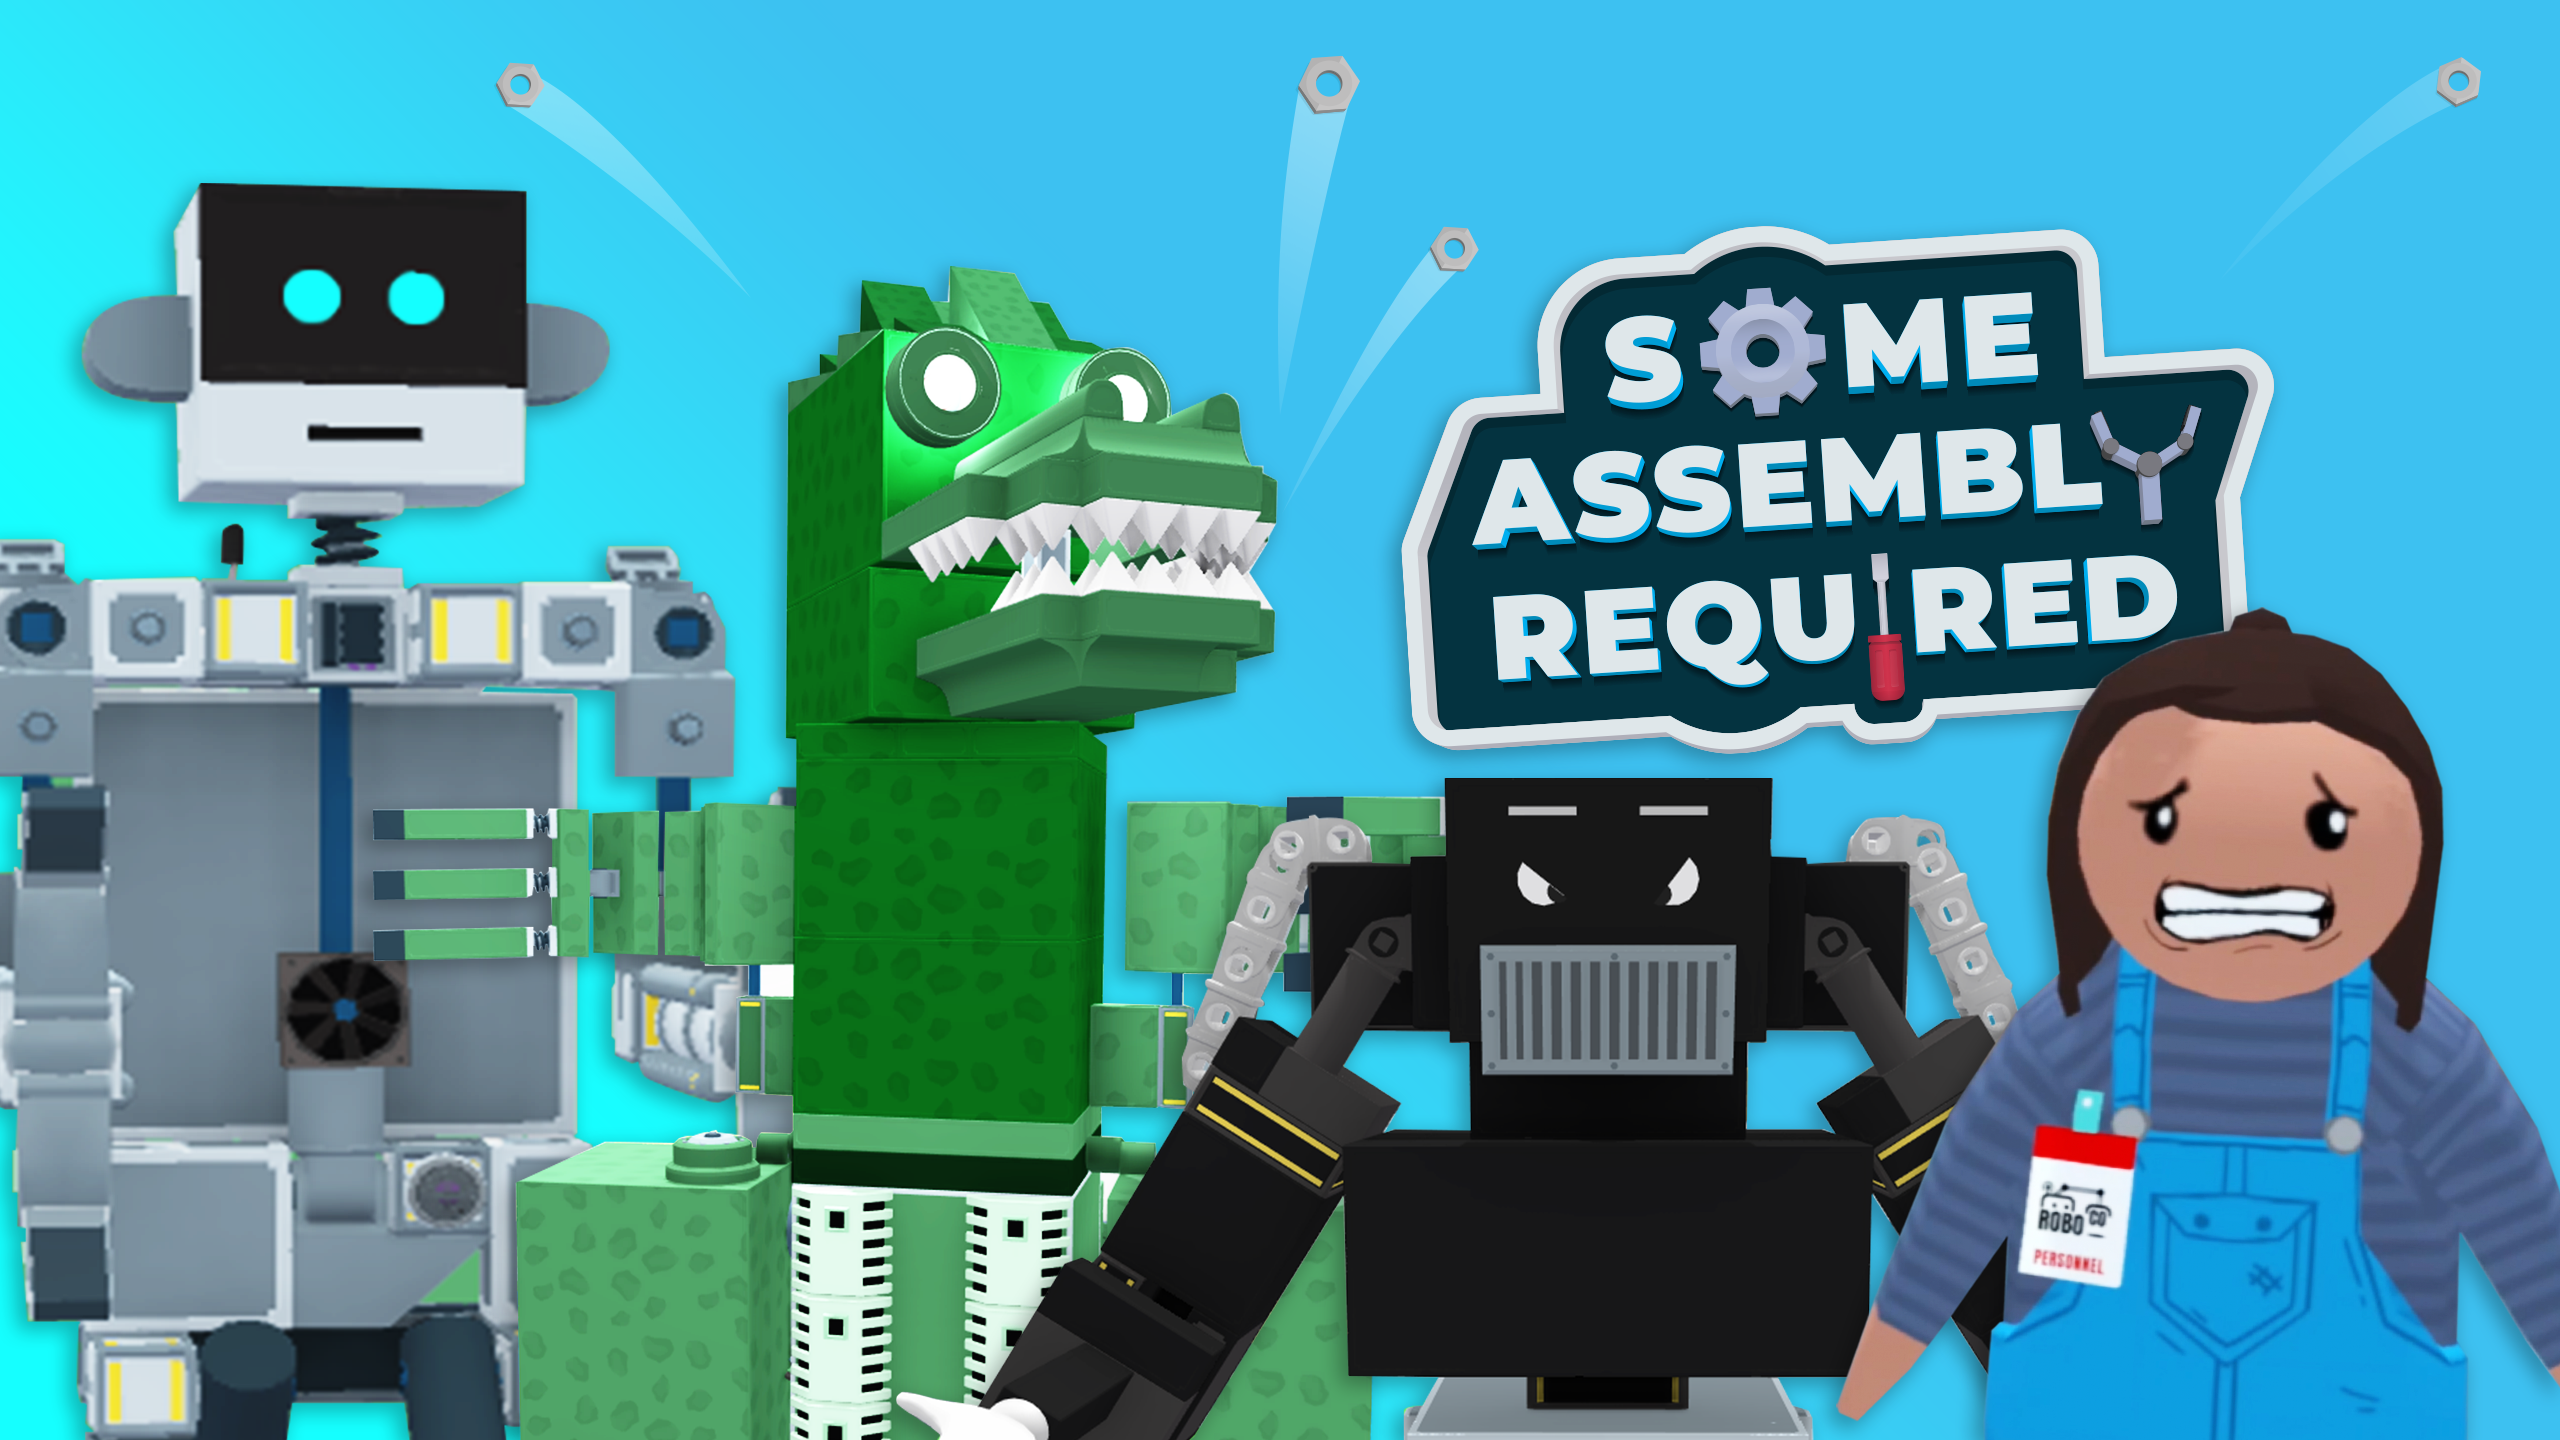 Some Assembly Required is Now Available!